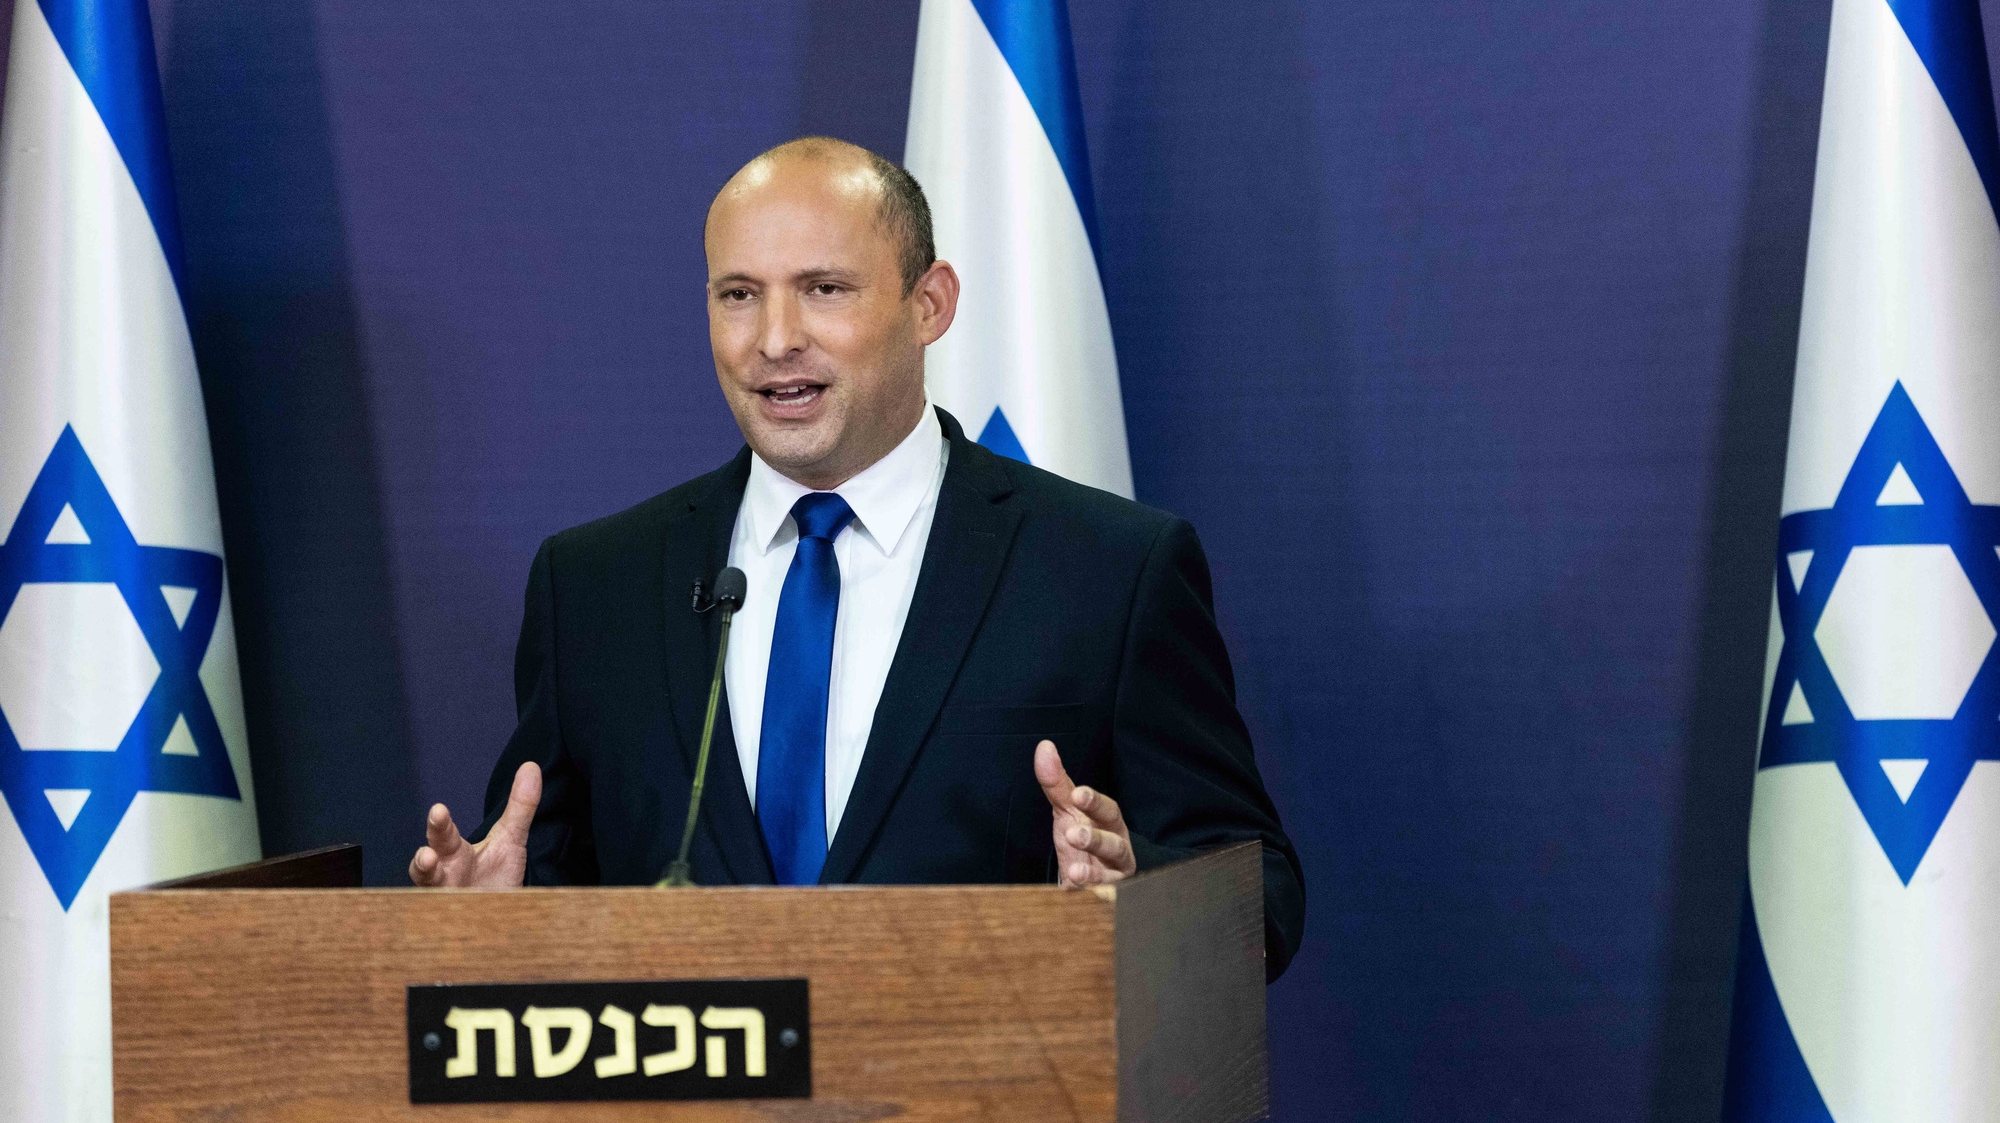 epa09237728 Leader of the Yemina party, Naftali Bennett, delivers a political statement in the Knesset (the Israeli Parliament), in Jerusalem, Israel, 30 May 2021. Naftali Bennett announced he will form a government with Yair Lapid to oust Prime Minister Benjamin Netanyahu.  EPA/YONATAN SINDEL / POOL